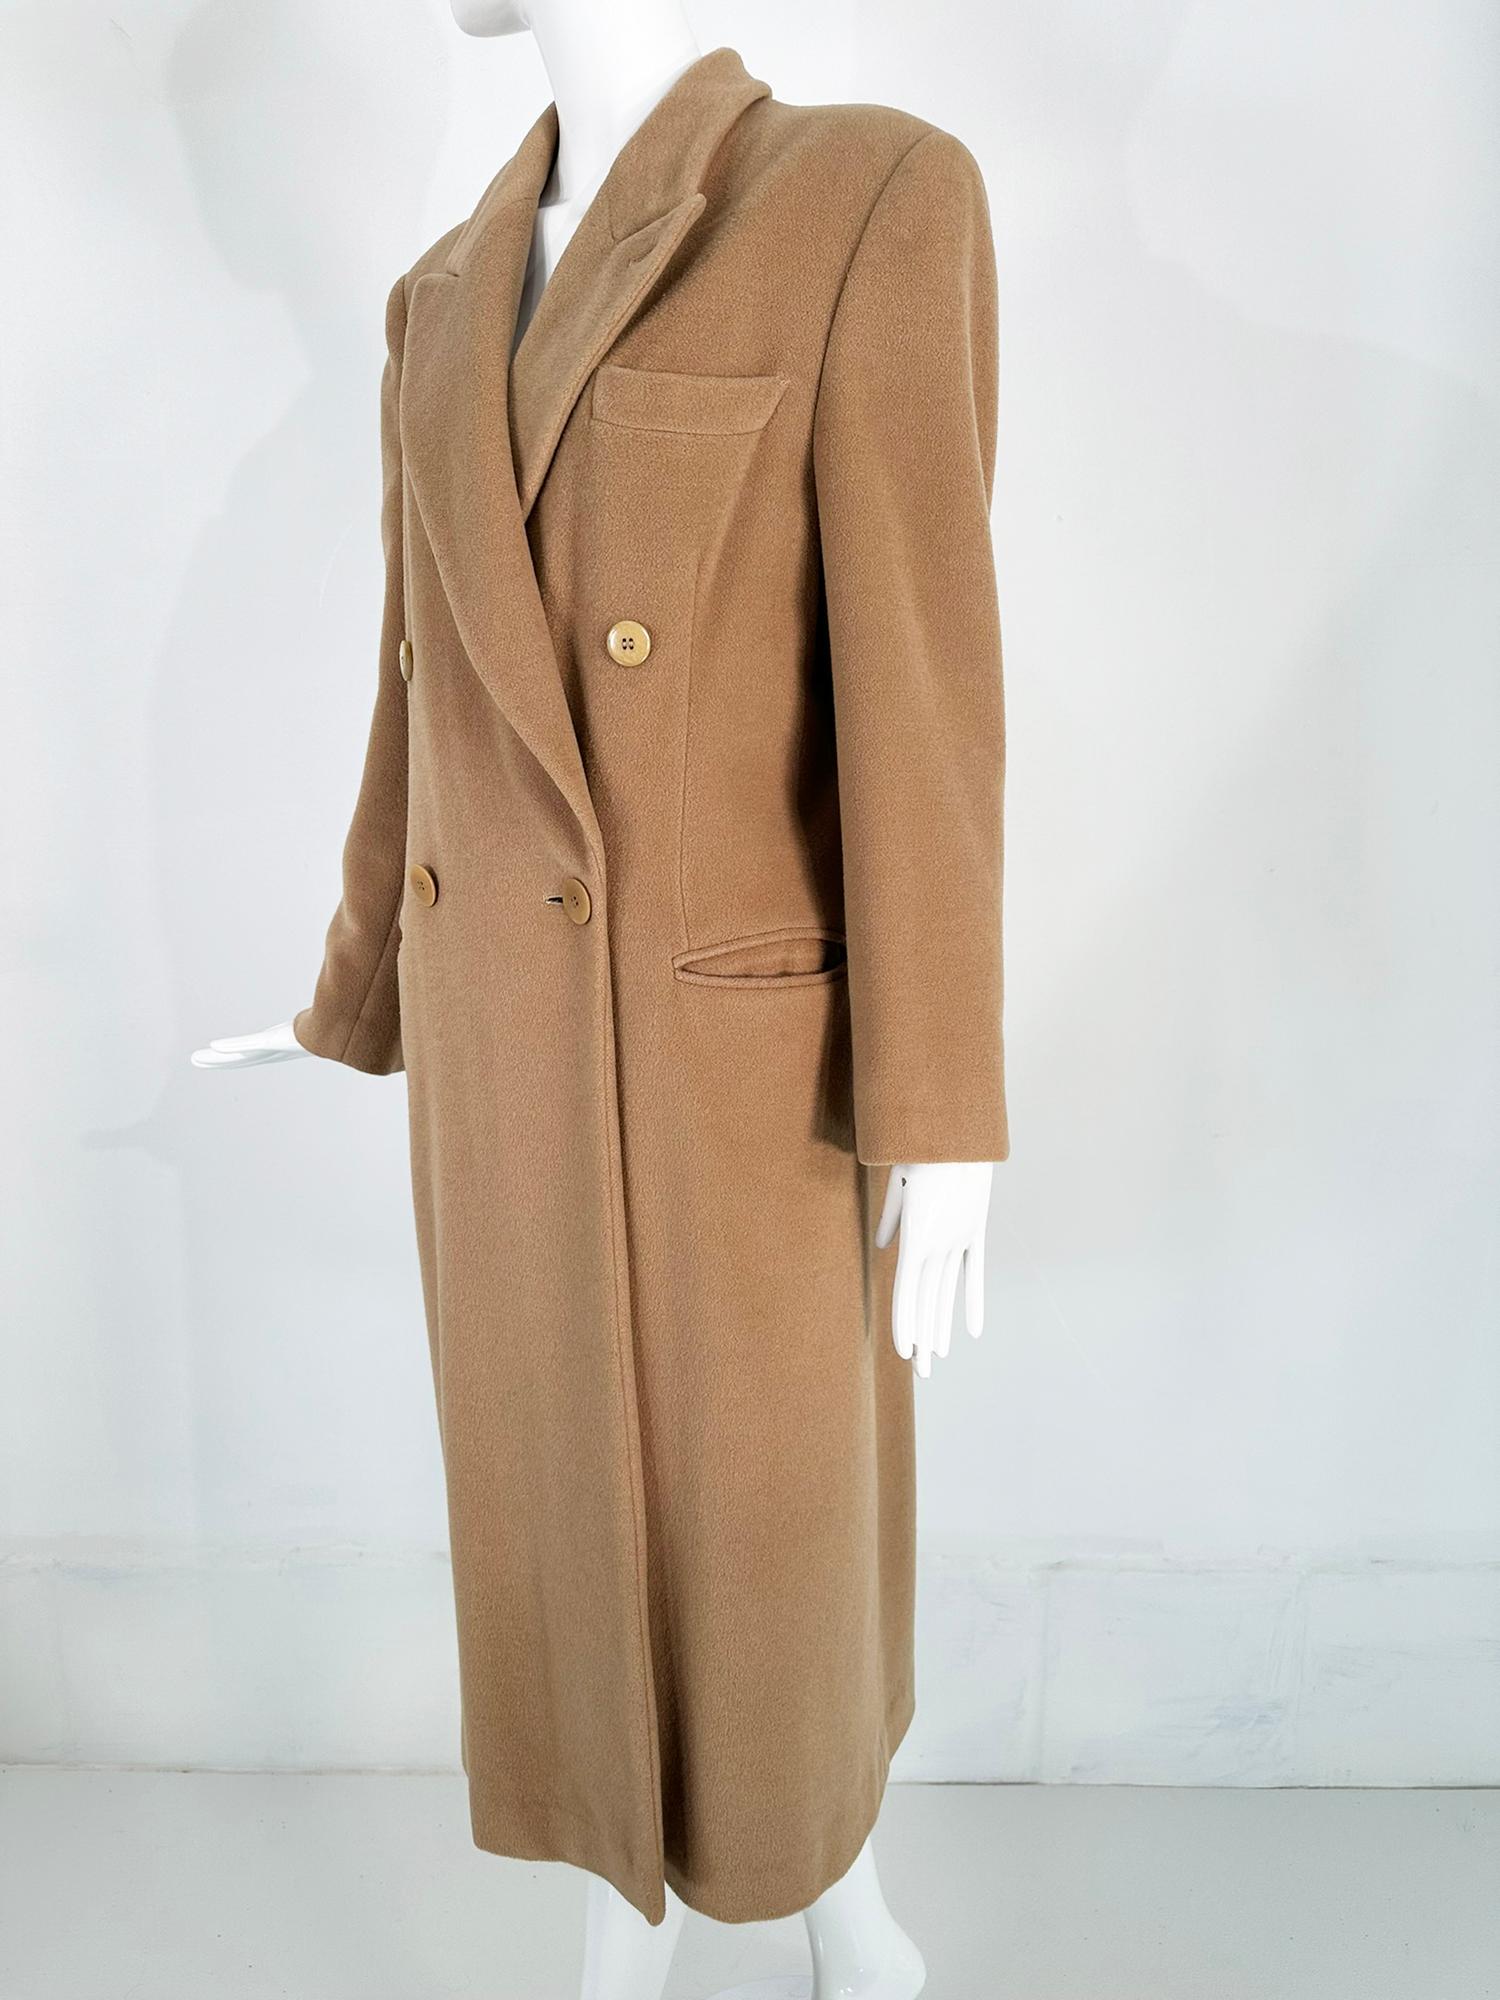 Giorgio Armani Camel Hair Classic Double Breasted Coat 1990s In Good Condition For Sale In West Palm Beach, FL